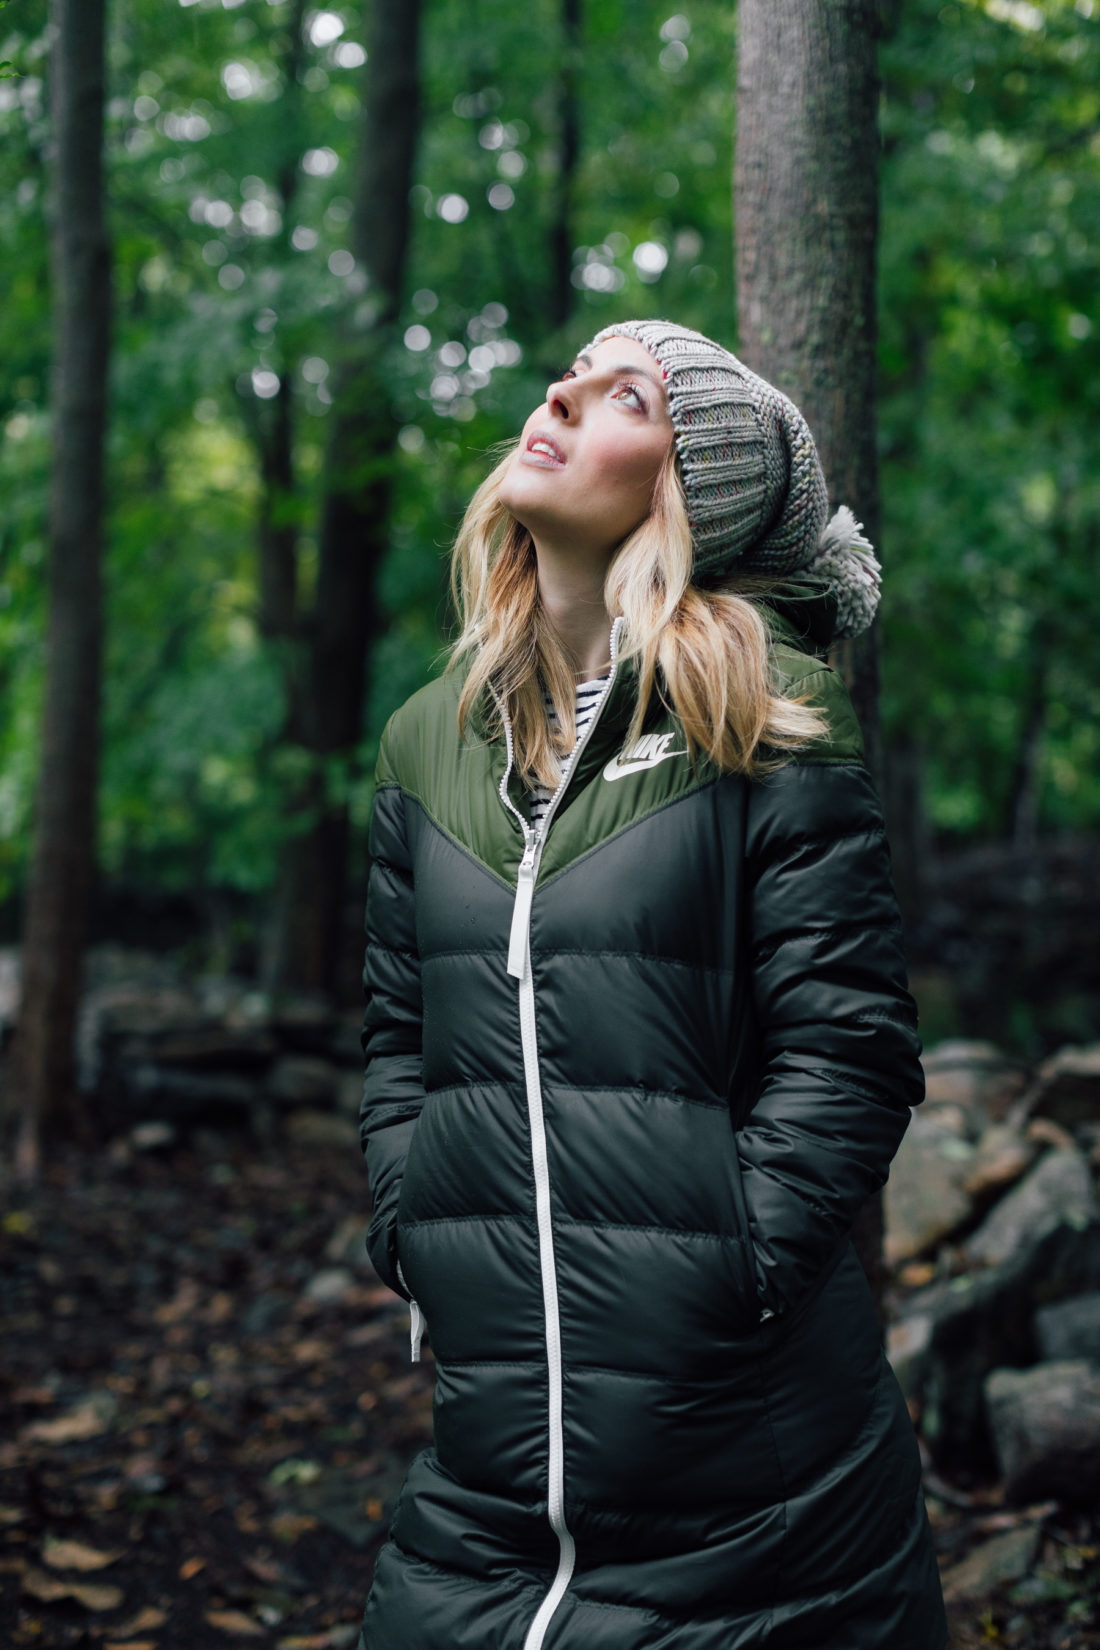 Eva Amurri Martino wears a puffy jacket and a grey knit hat and stands in the woods in Connecticut